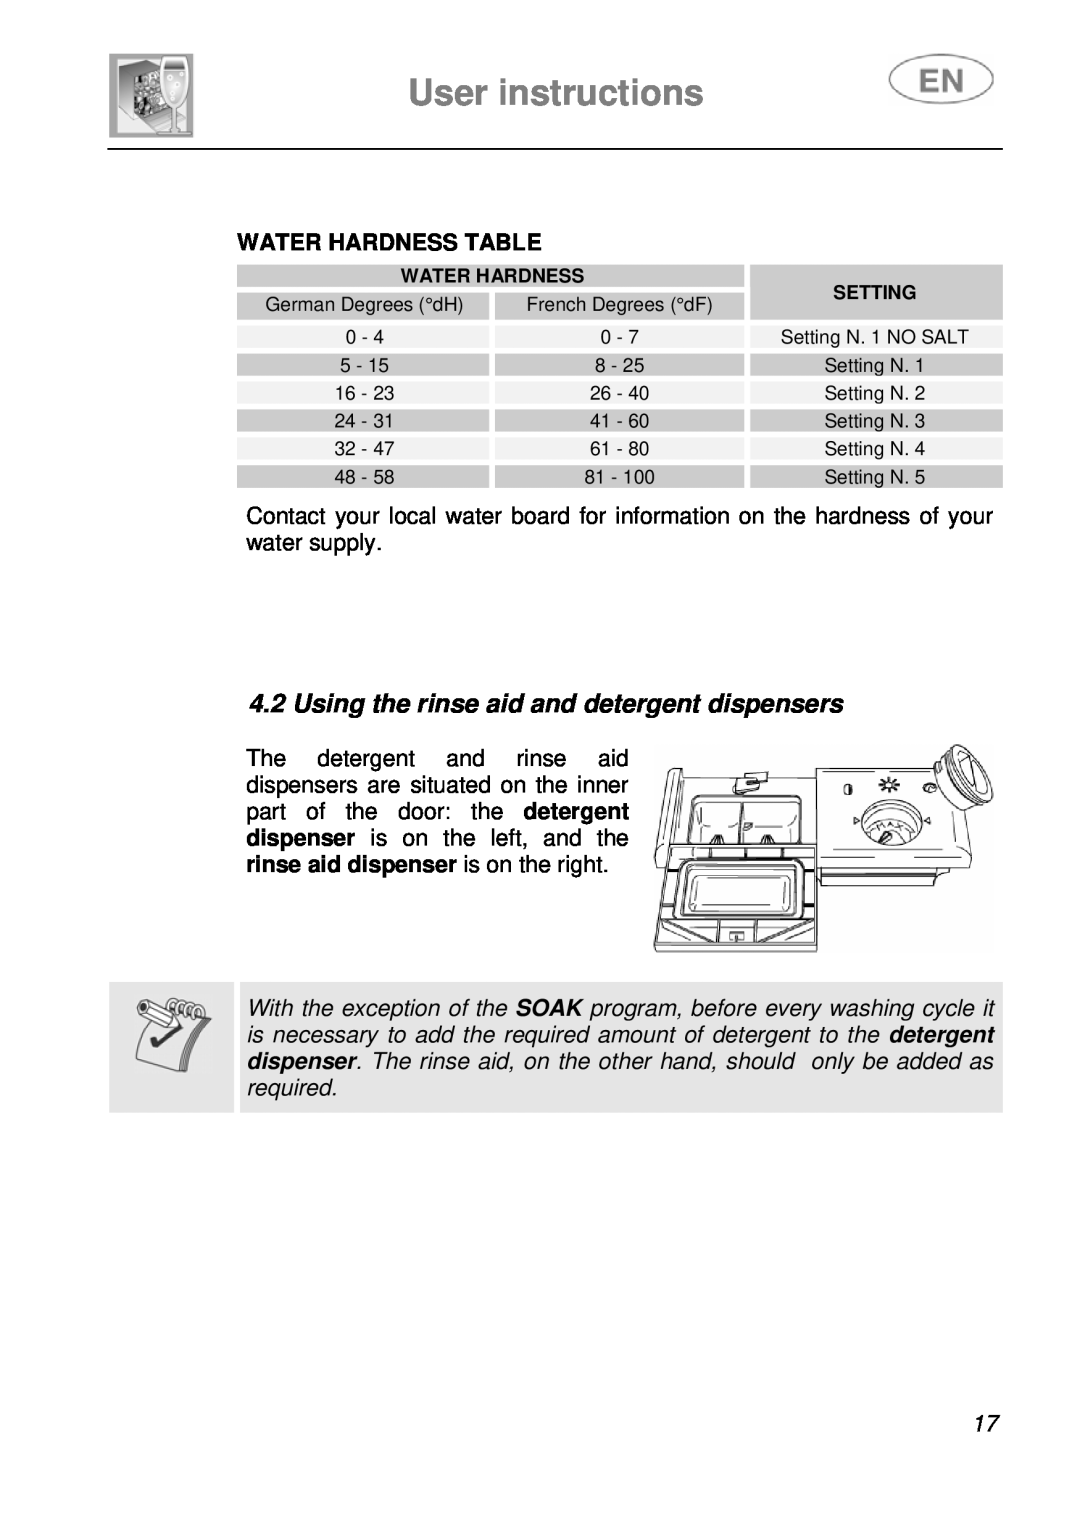 Smeg ST115S instruction manual User instructions, Using the rinse aid and detergent dispensers, Water Hardness Table 